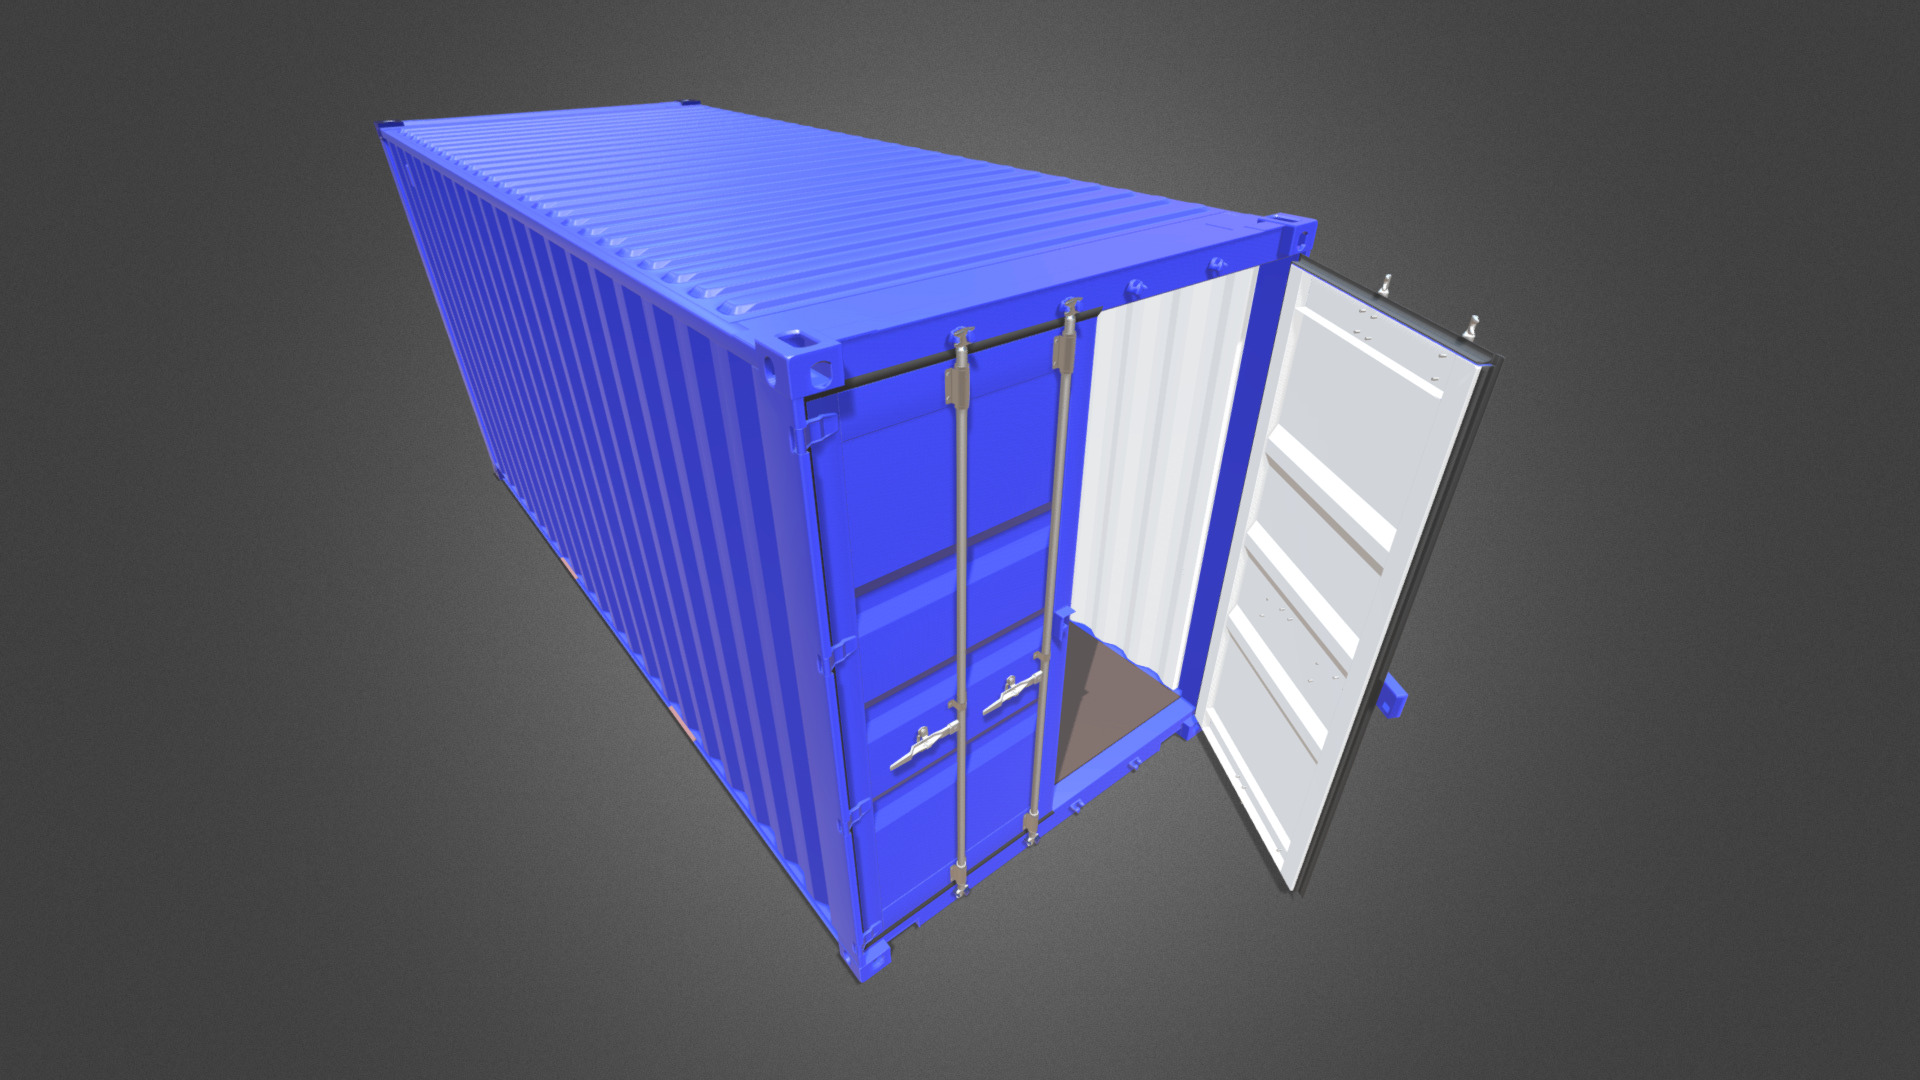 3D model ISO SHIPPING CONTAINER 20" HC (high cube) - This is a 3D model of the ISO SHIPPING CONTAINER 20" HC (high cube). The 3D model is about a blue and white solar panel.